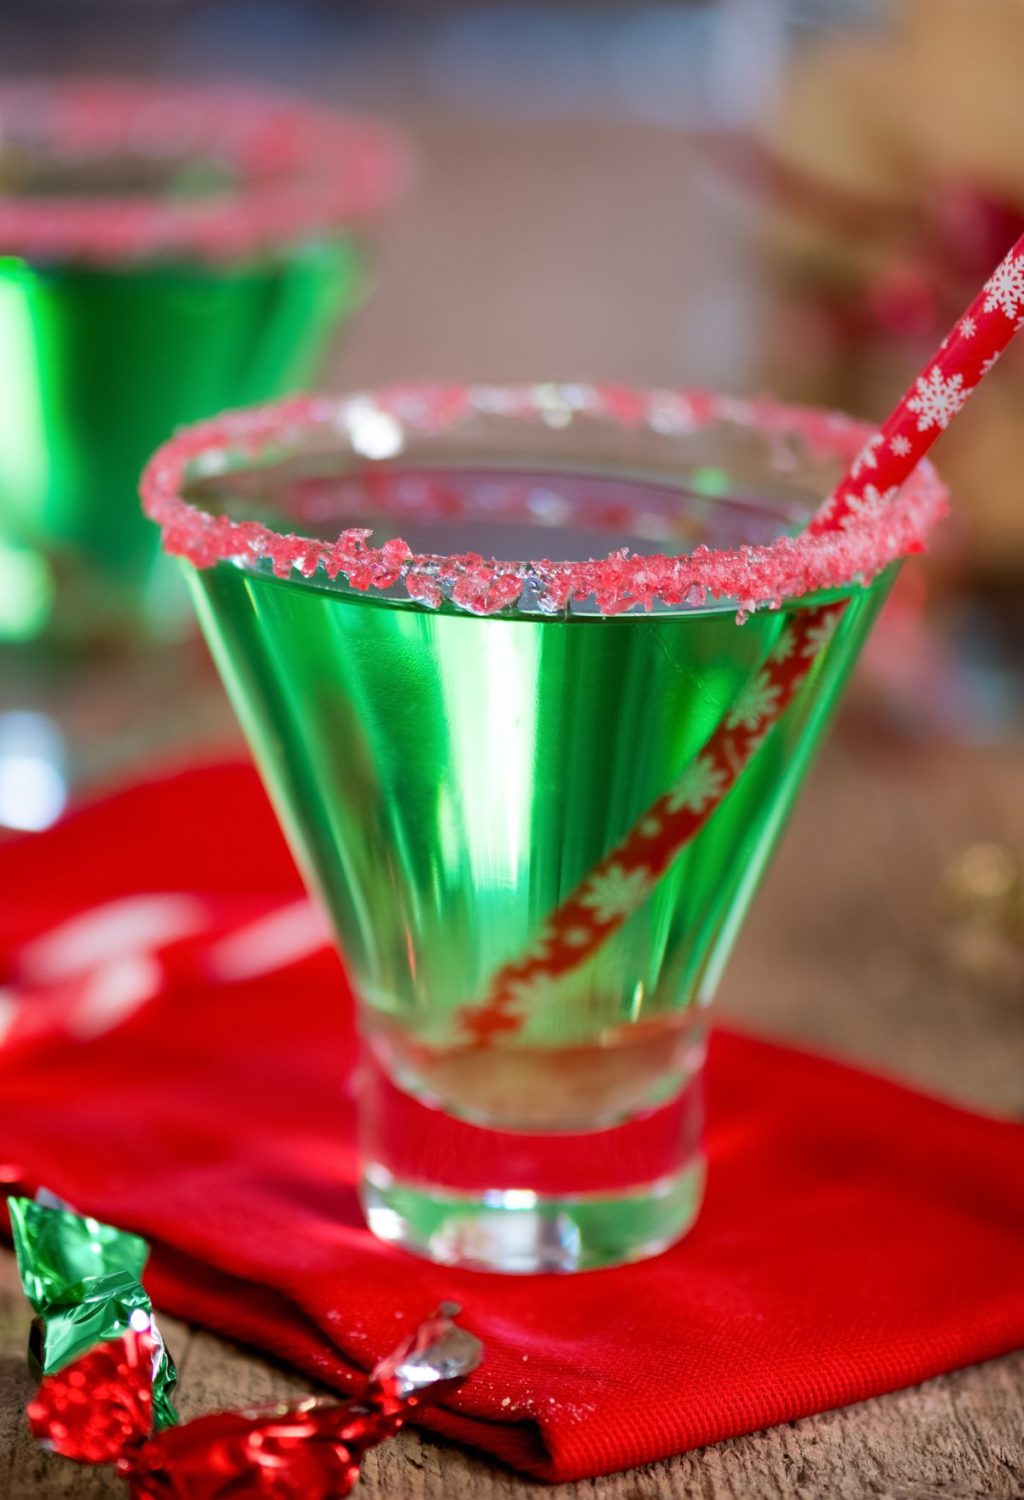 Two green martinis on a red napkin.